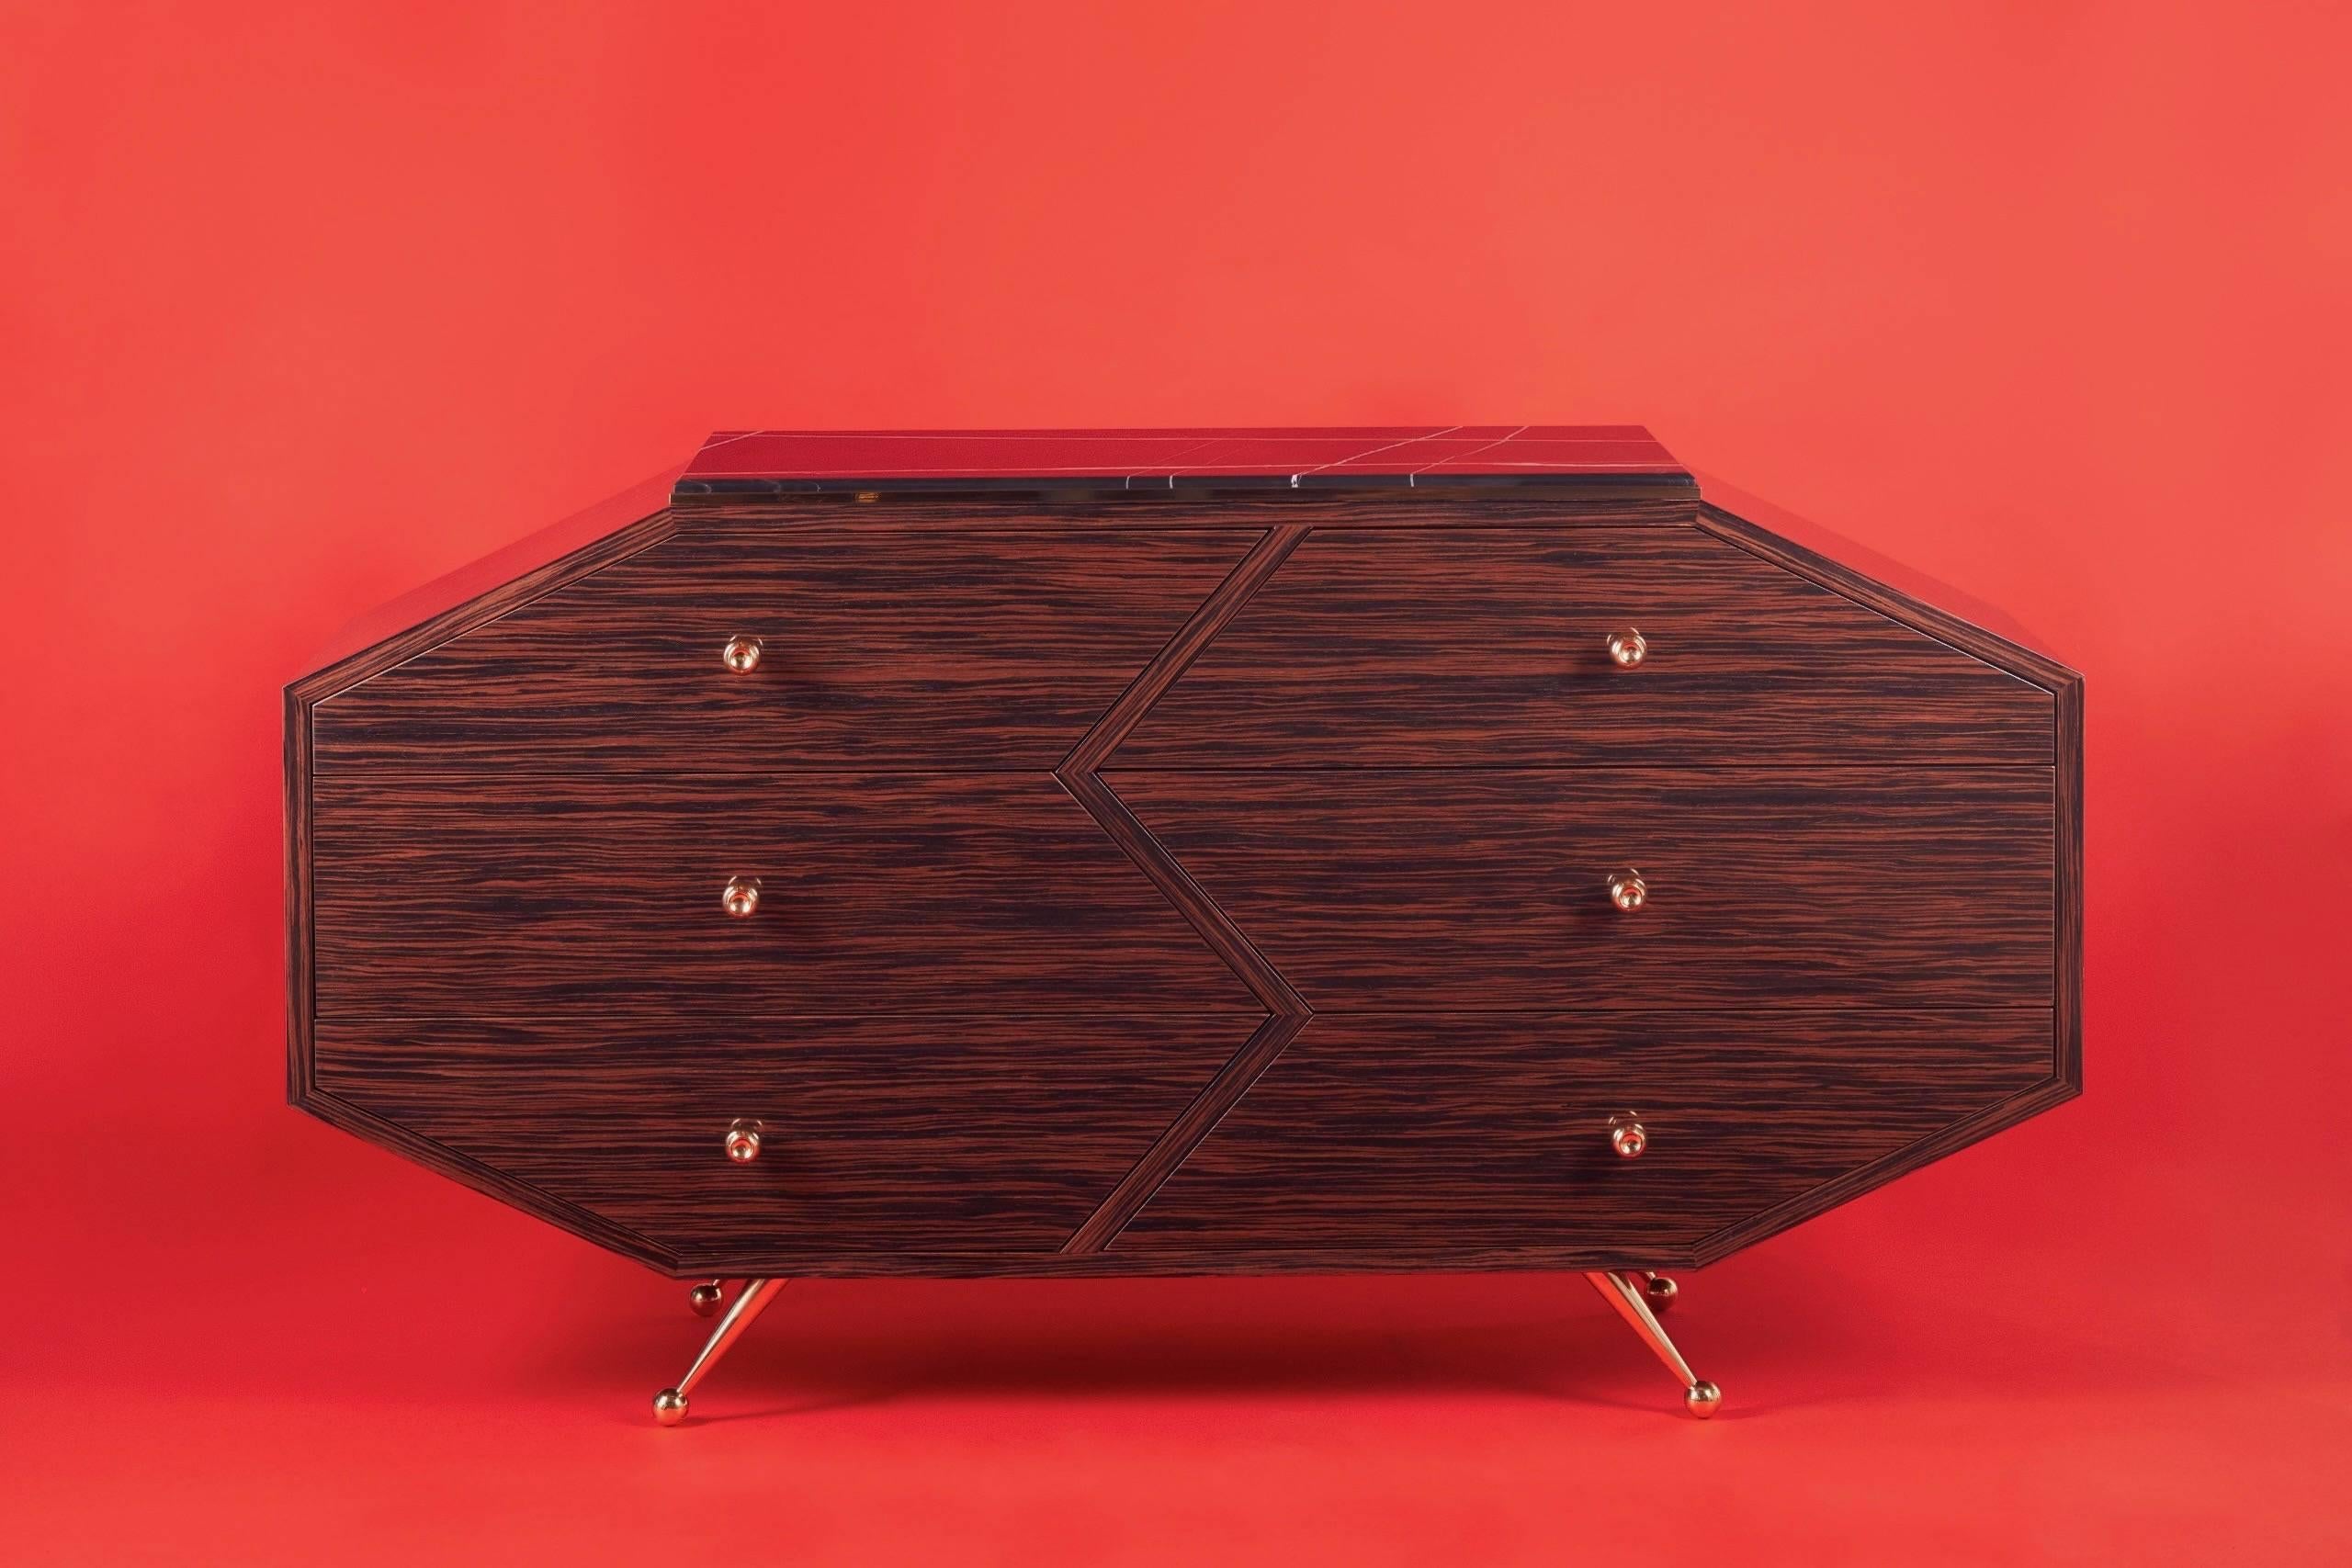 Contemporary and modern this Art Deco-inspired cabinet/dresser is custom-made by hand and designed by Troy Smith Studio. The Macassar Ebony is finished in a super high gloss finish which requires over 10 coats. All hardware including the feet and